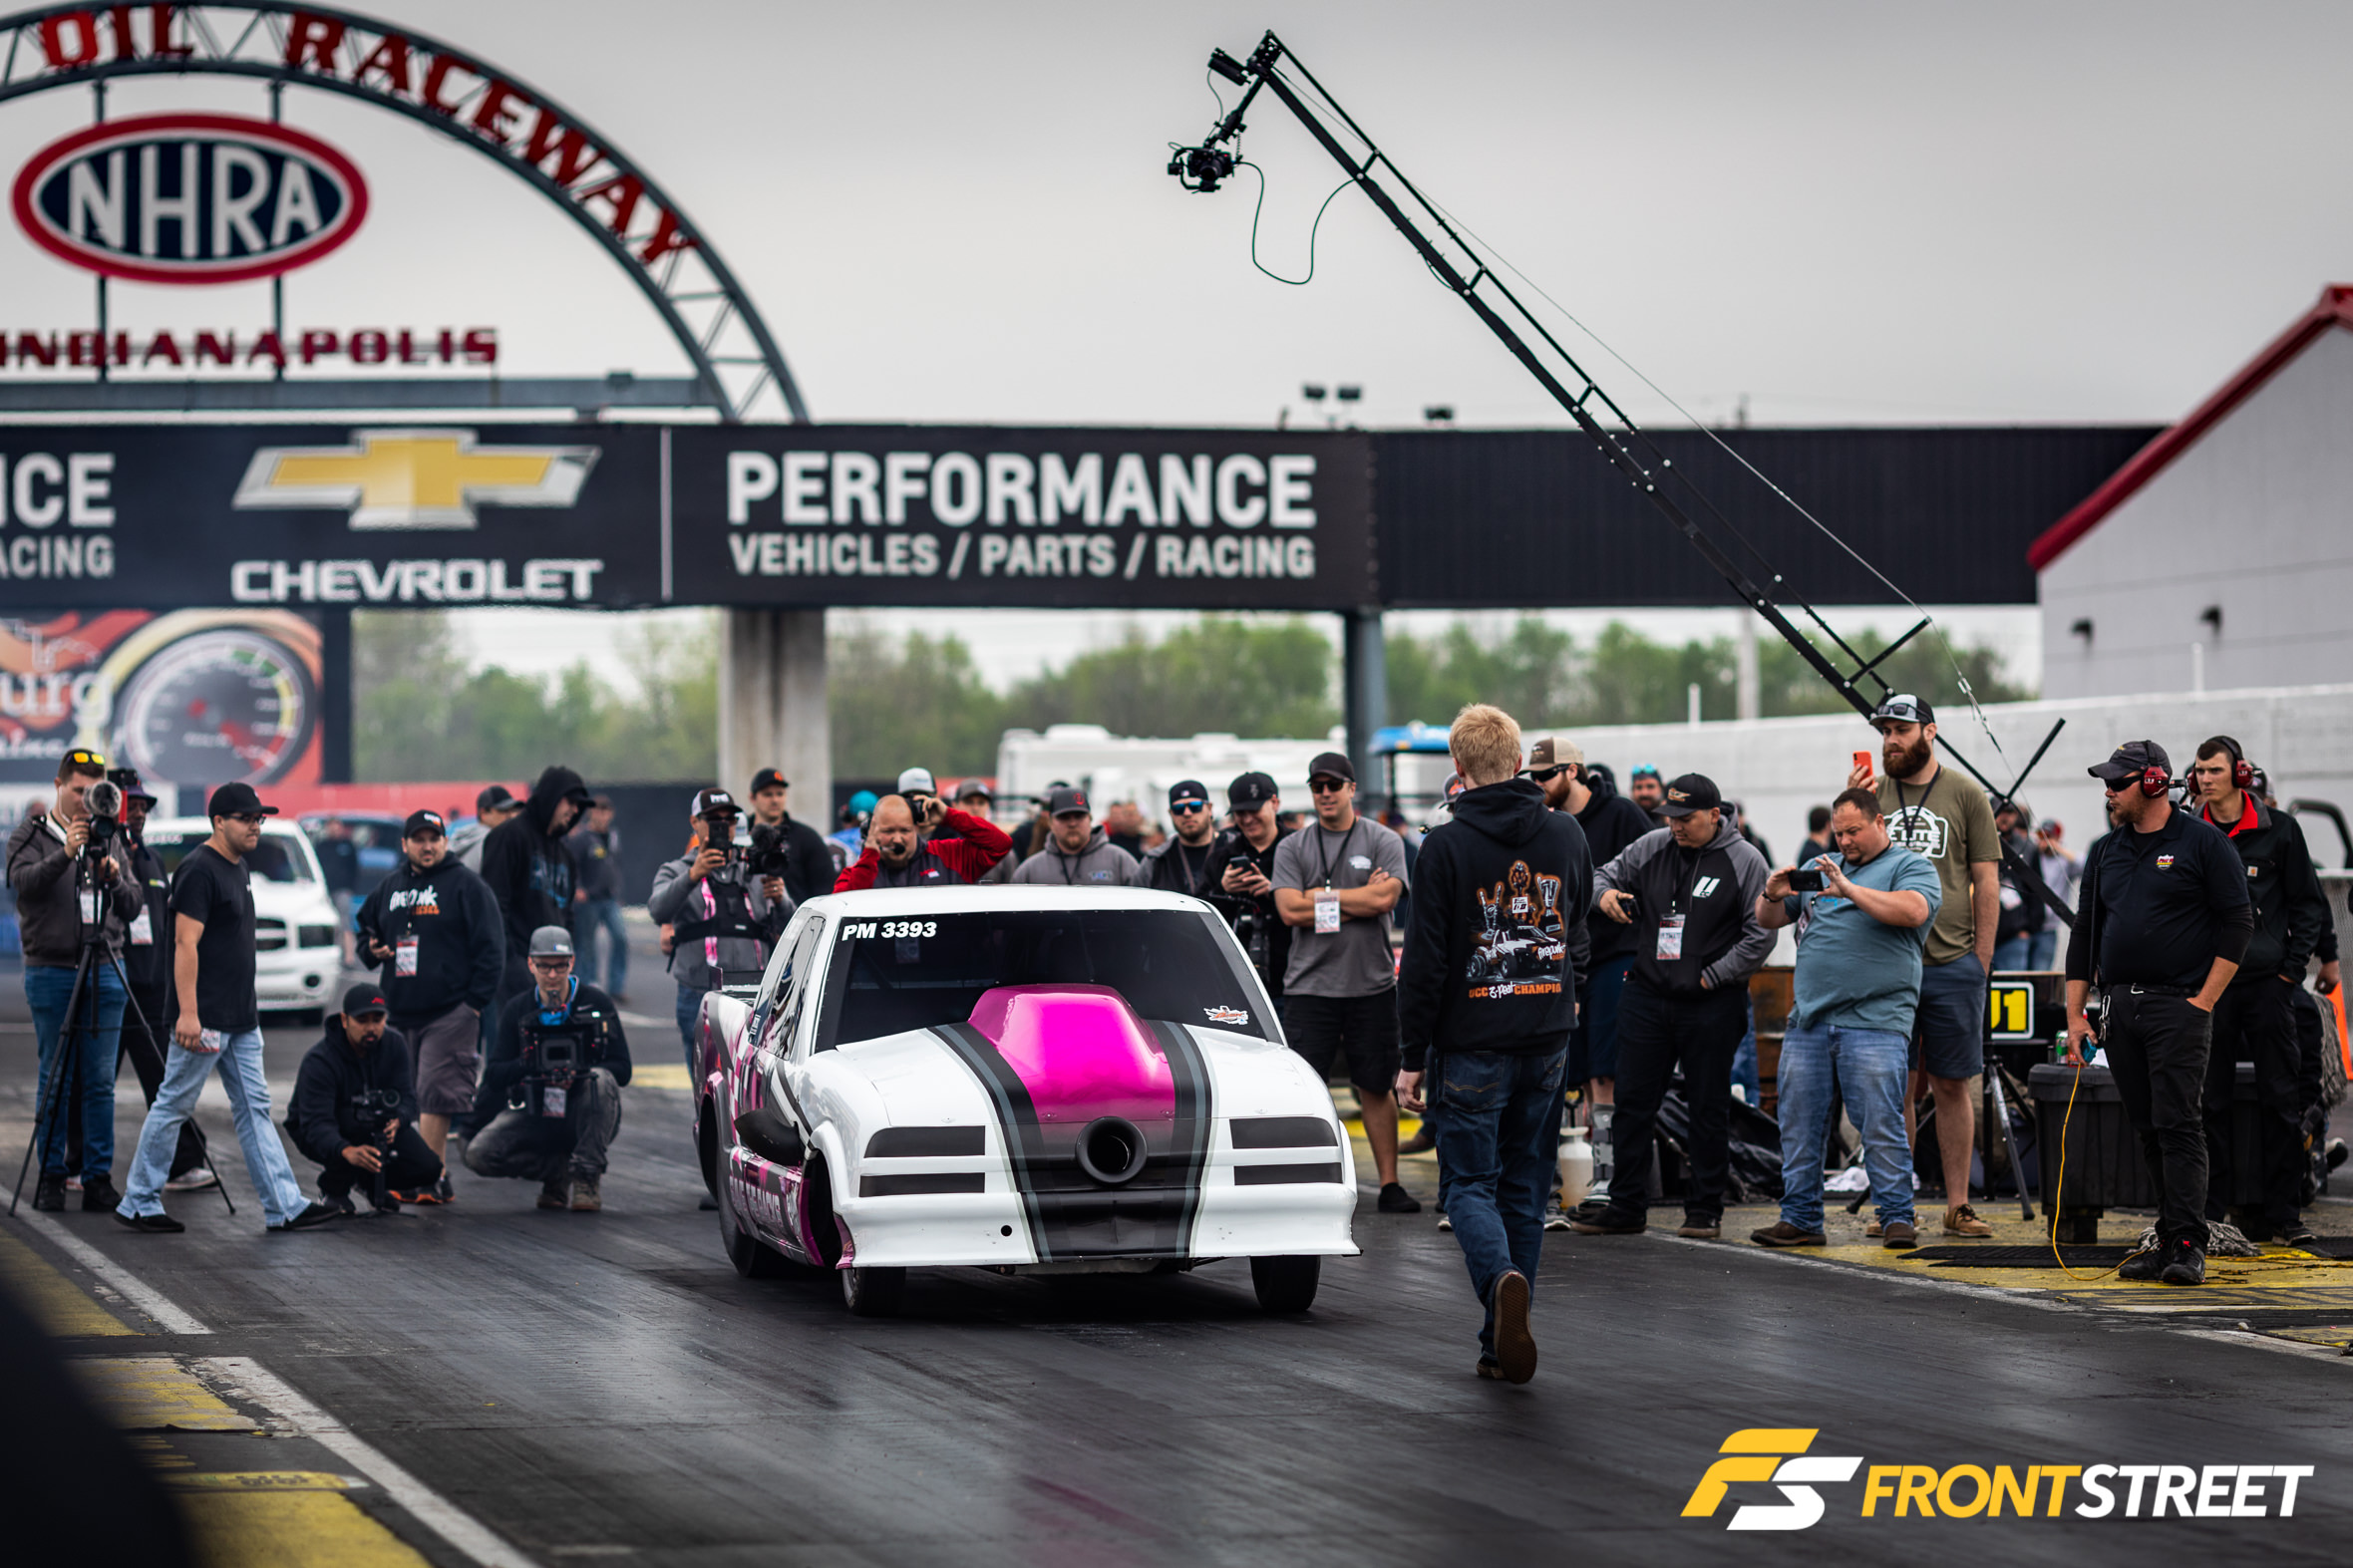 Firepunk Raises The Diesel Performance Bar And Pushes The Limits—Again!